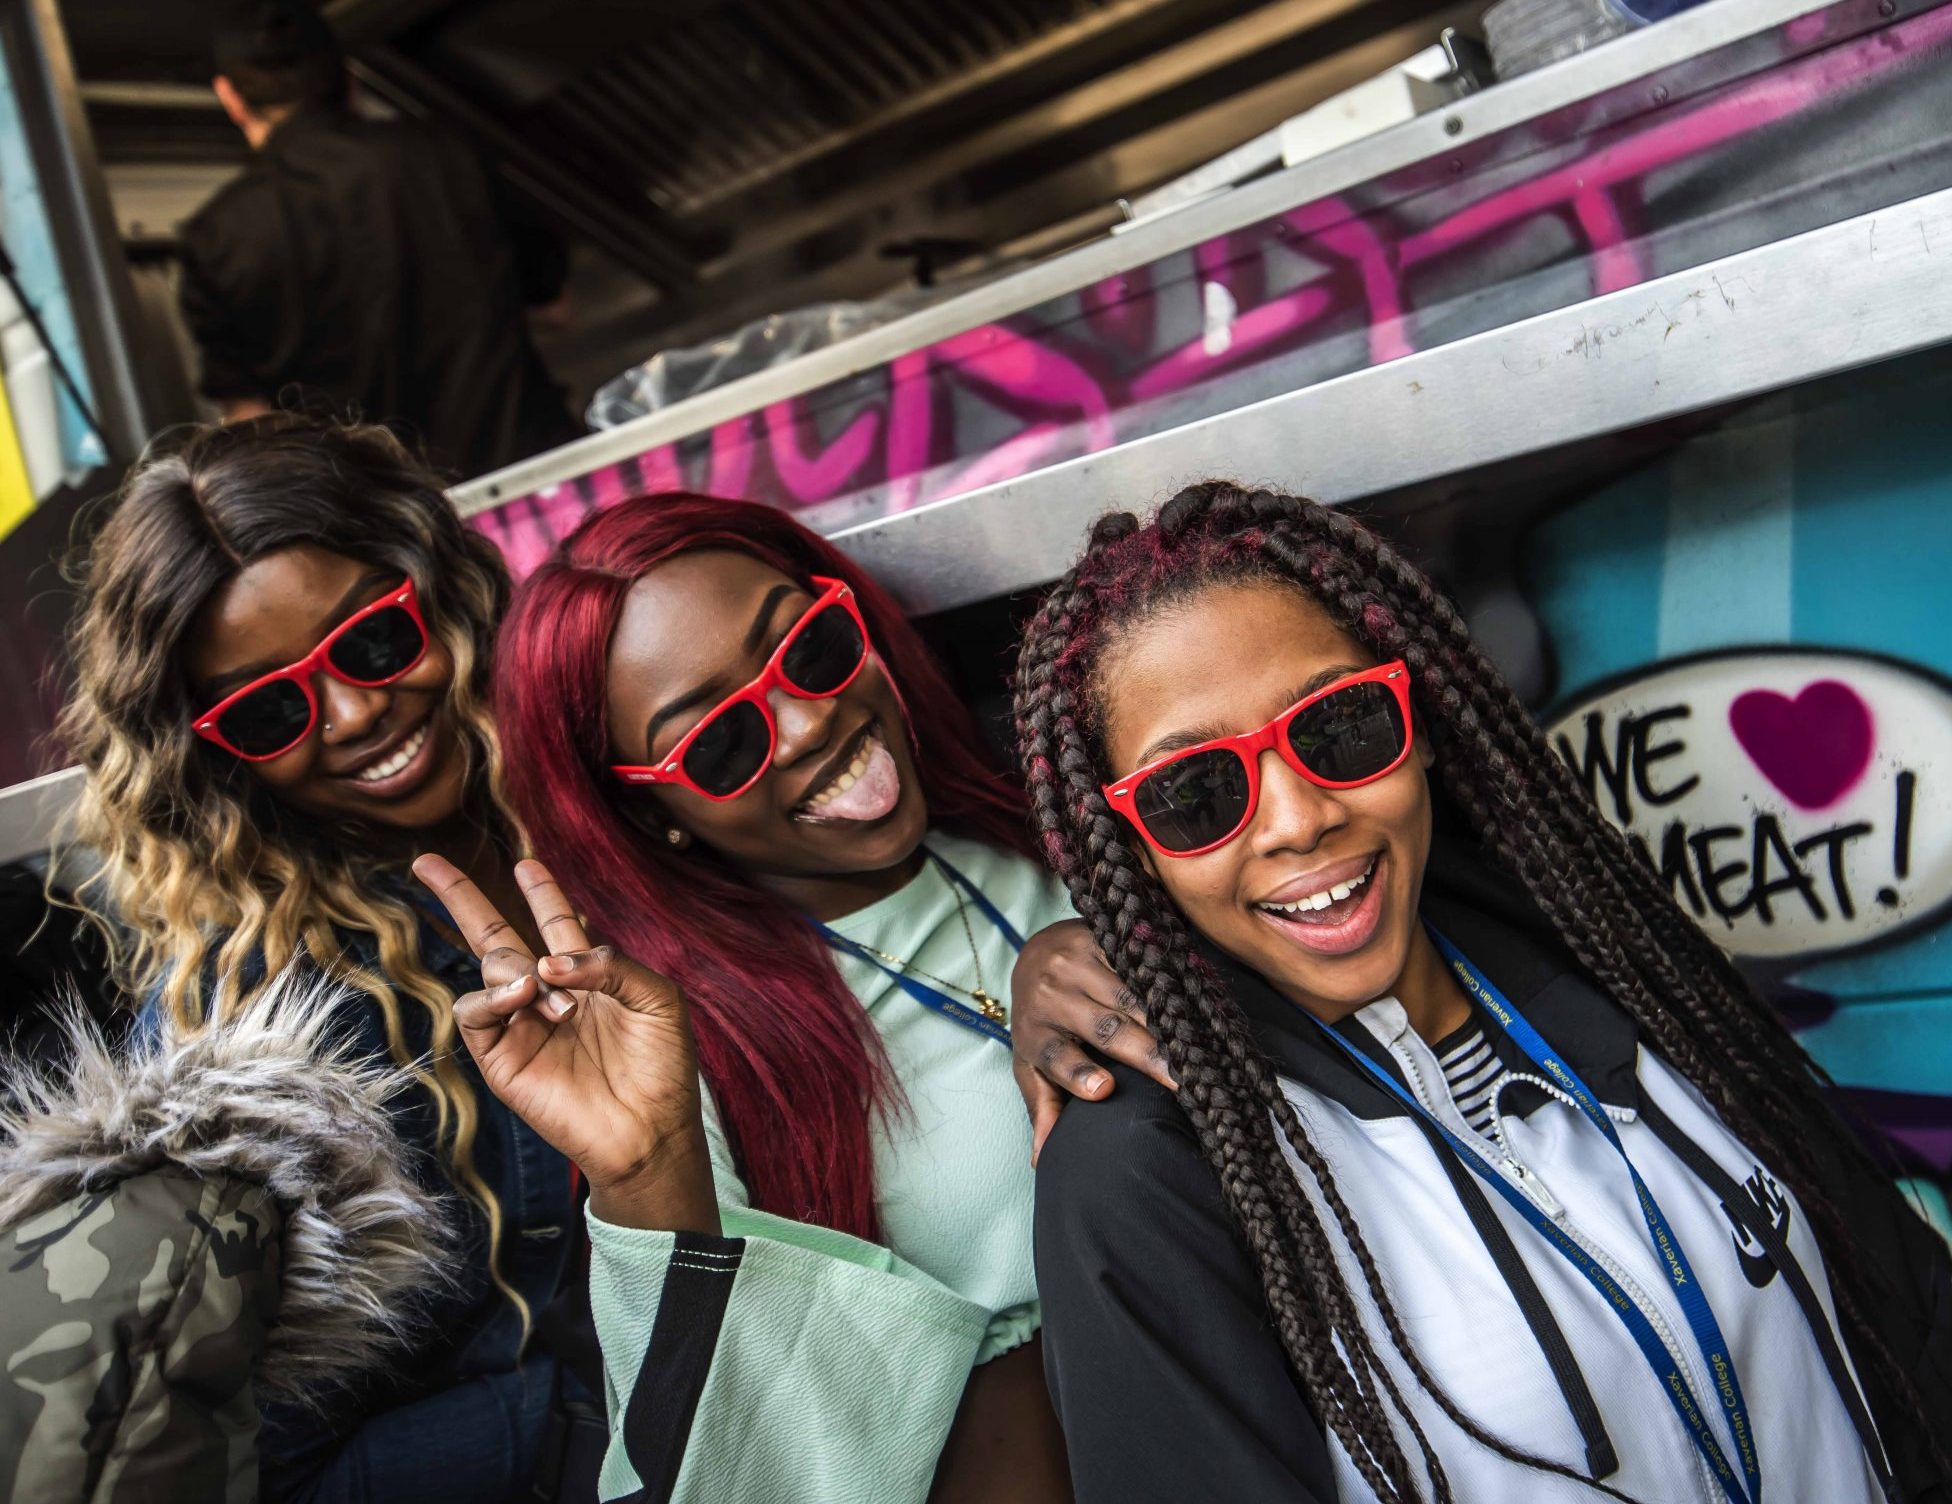 There'll be discounts for students at the MCR Student Social at Manchester Arndale